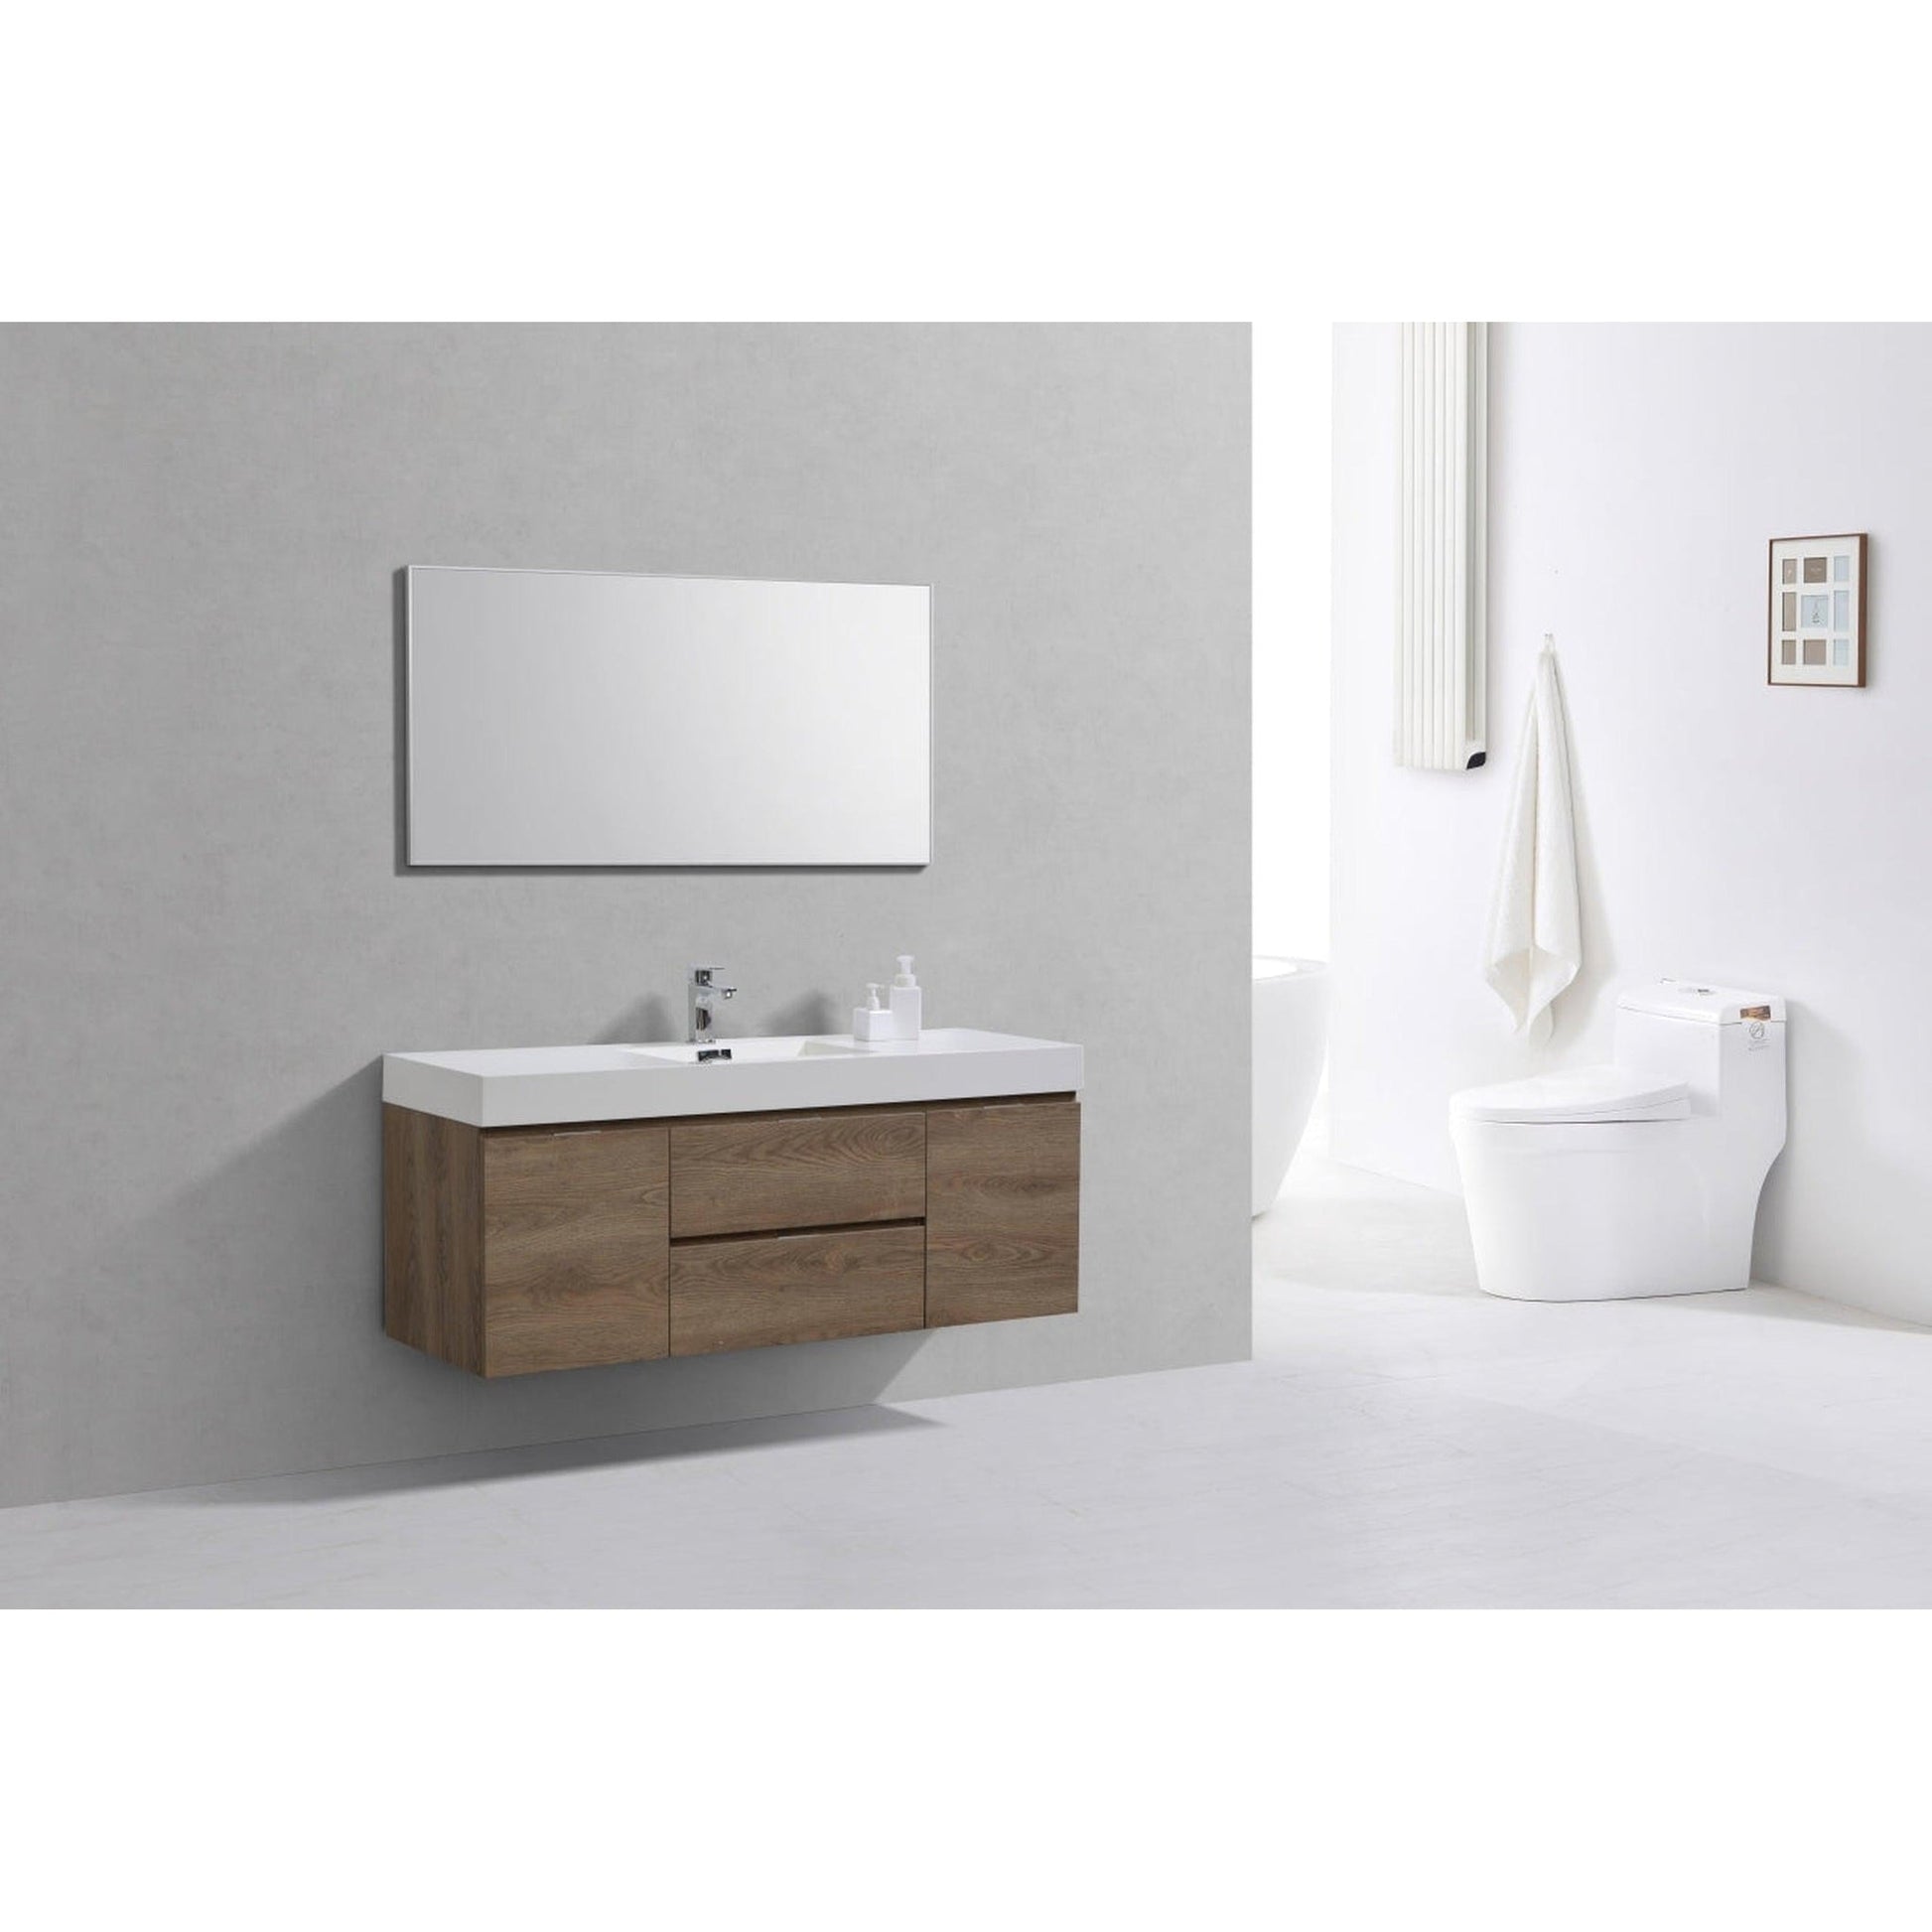 KubeBath Bliss 60" Butternut Wall-Mounted Modern Bathroom Vanity With Single Integrated Acrylic Sink With Overflow and 60" Butternut Framed Mirror With Shelf